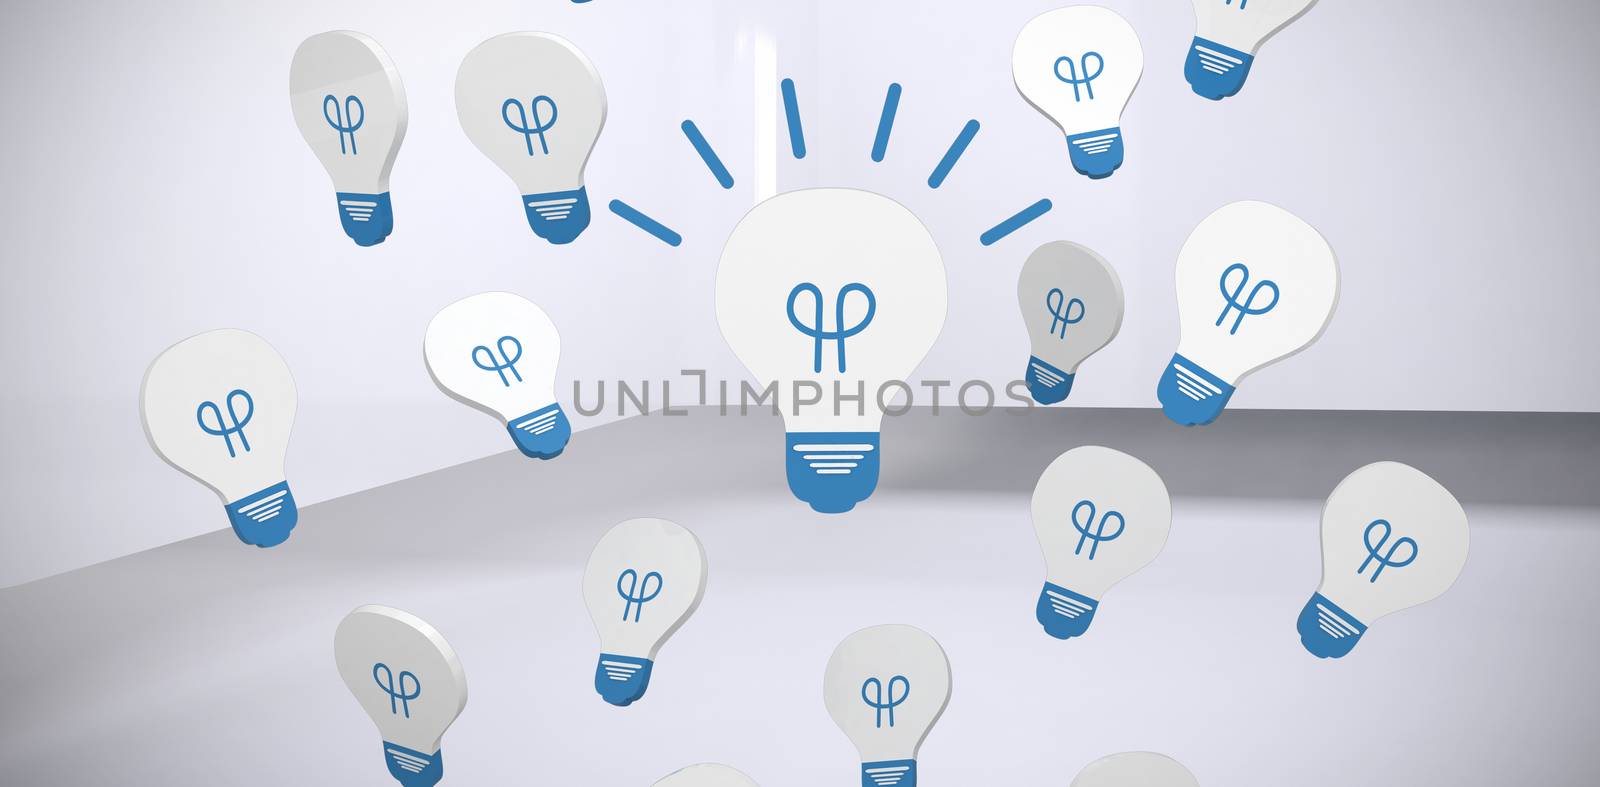 Glowing light bulb icon against abstract room